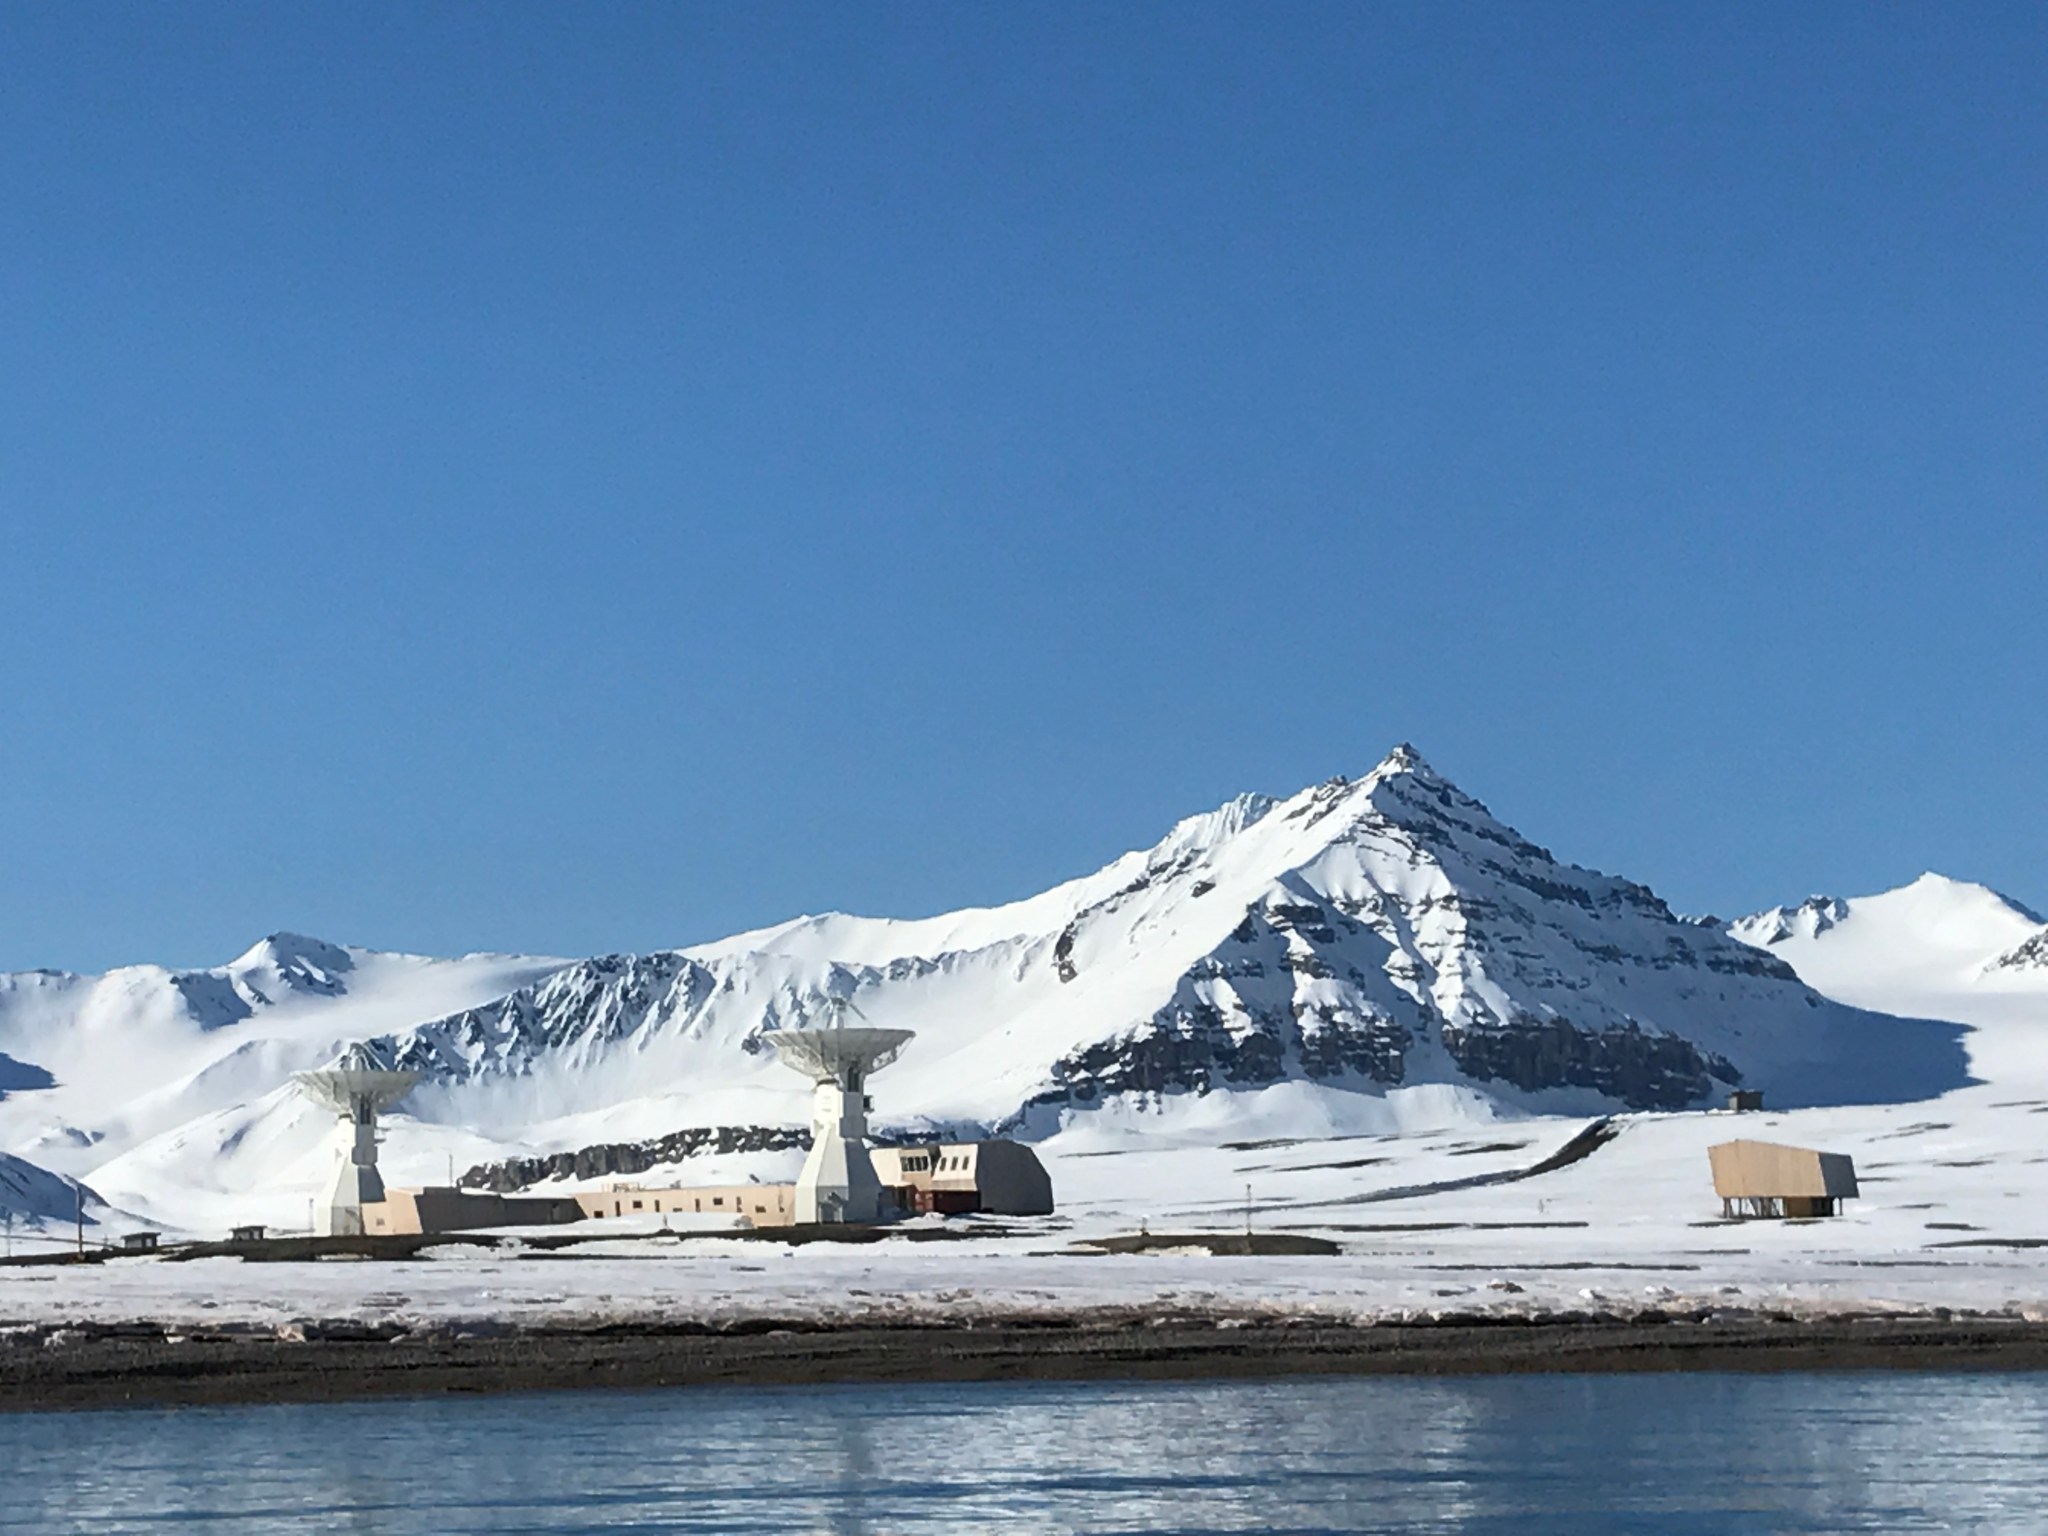 The scientific base of Ny-Ålesund, Svalbard, as seen from the sea.  The base is made of small tan buildings with two white satellite dishes pointed to the sky. Snow covered mountains rise just behind the base.